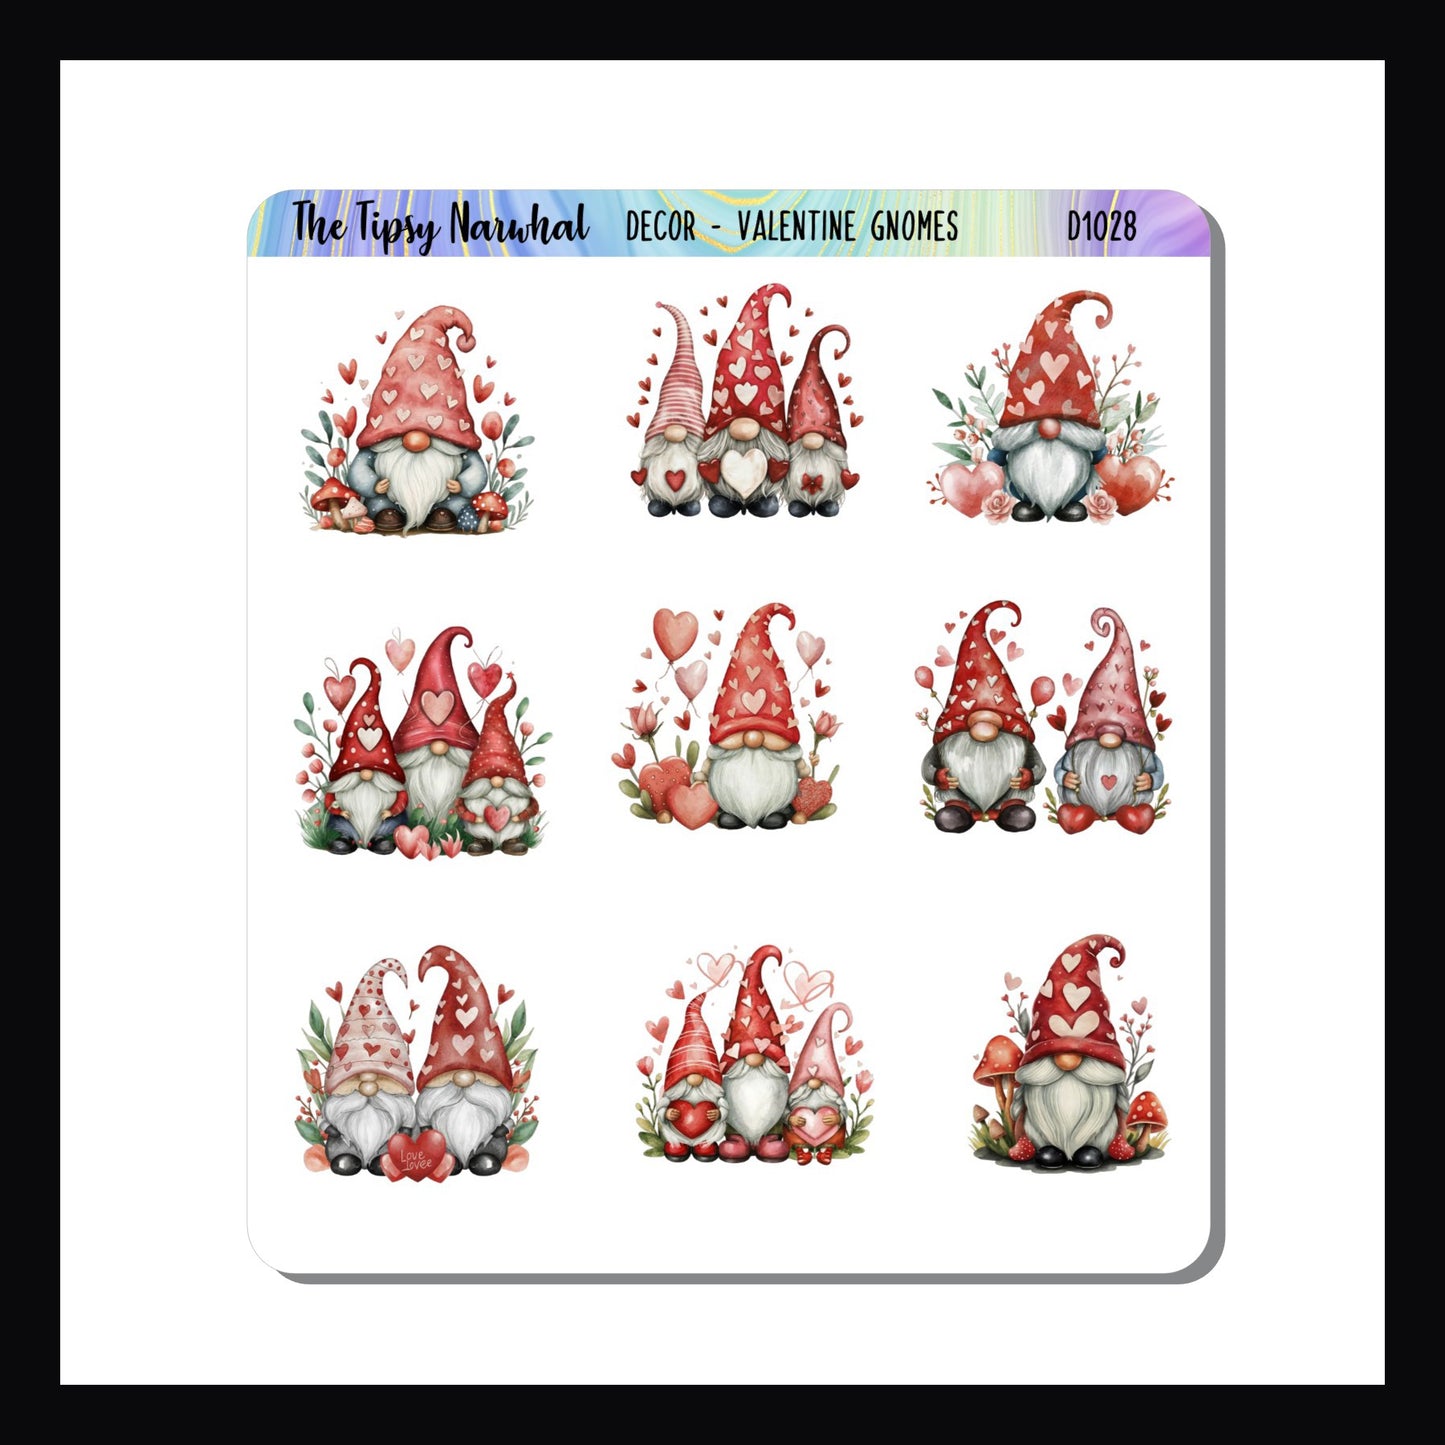 Valentine Gnomes Decor Sheet.  Set of 9 gnome stickers.  Gnomes dressed ready for Valentines day with hearts, balloons and flowers. 